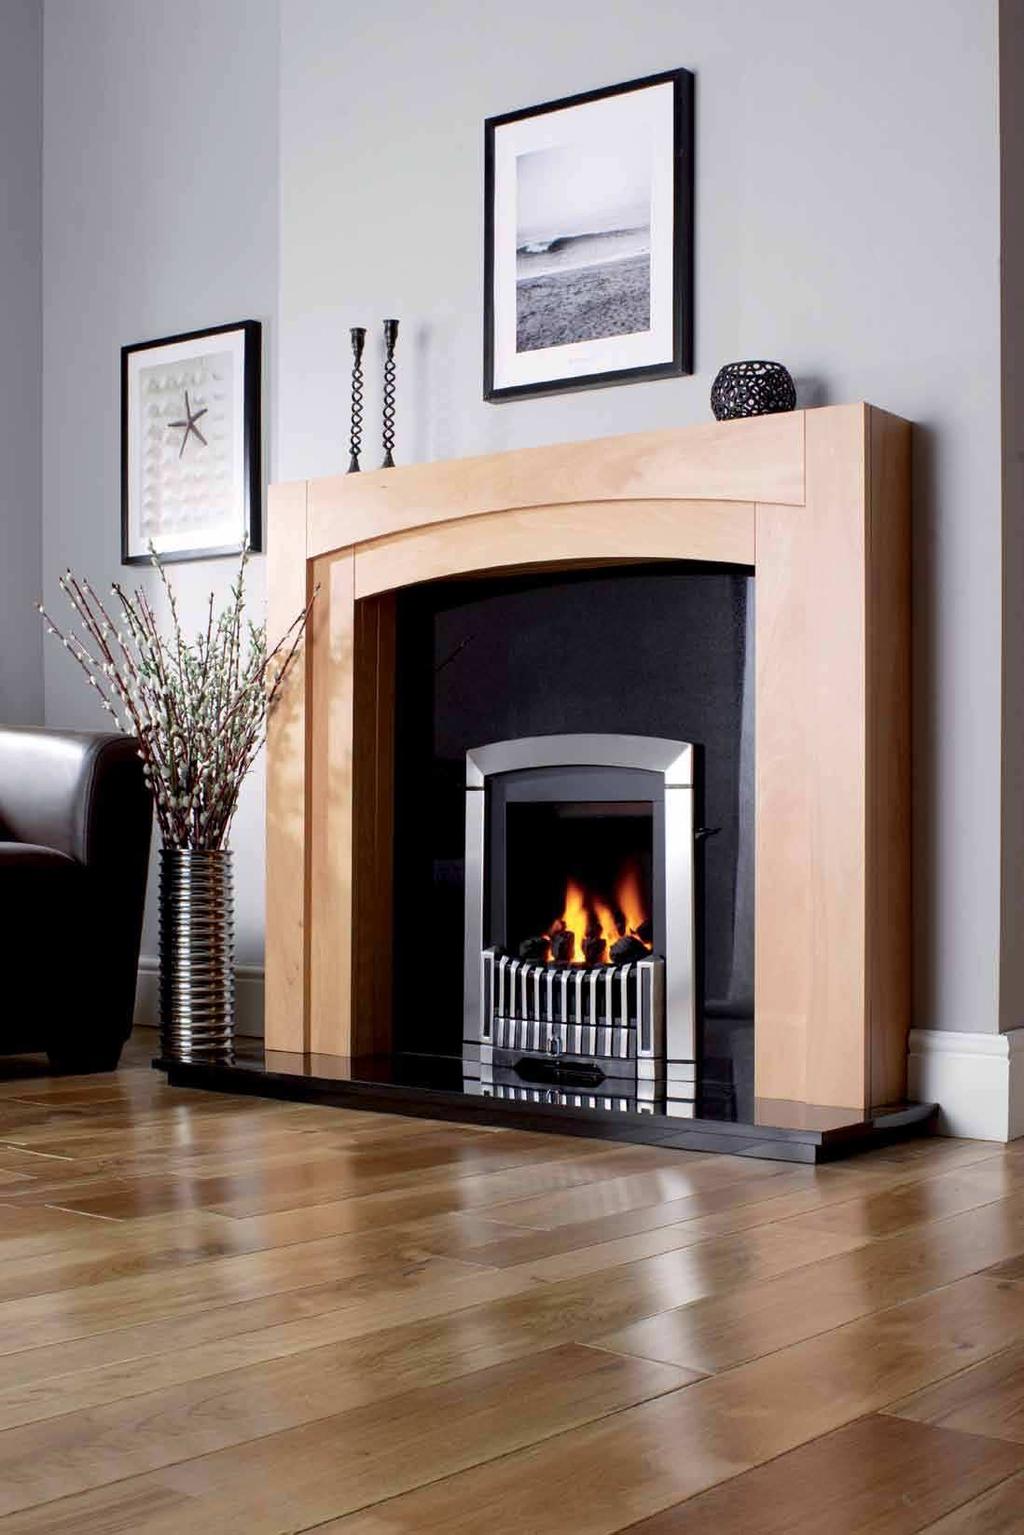 The Melody is an elegant slimline fire enabling installation in almost any flue including pre-cast.